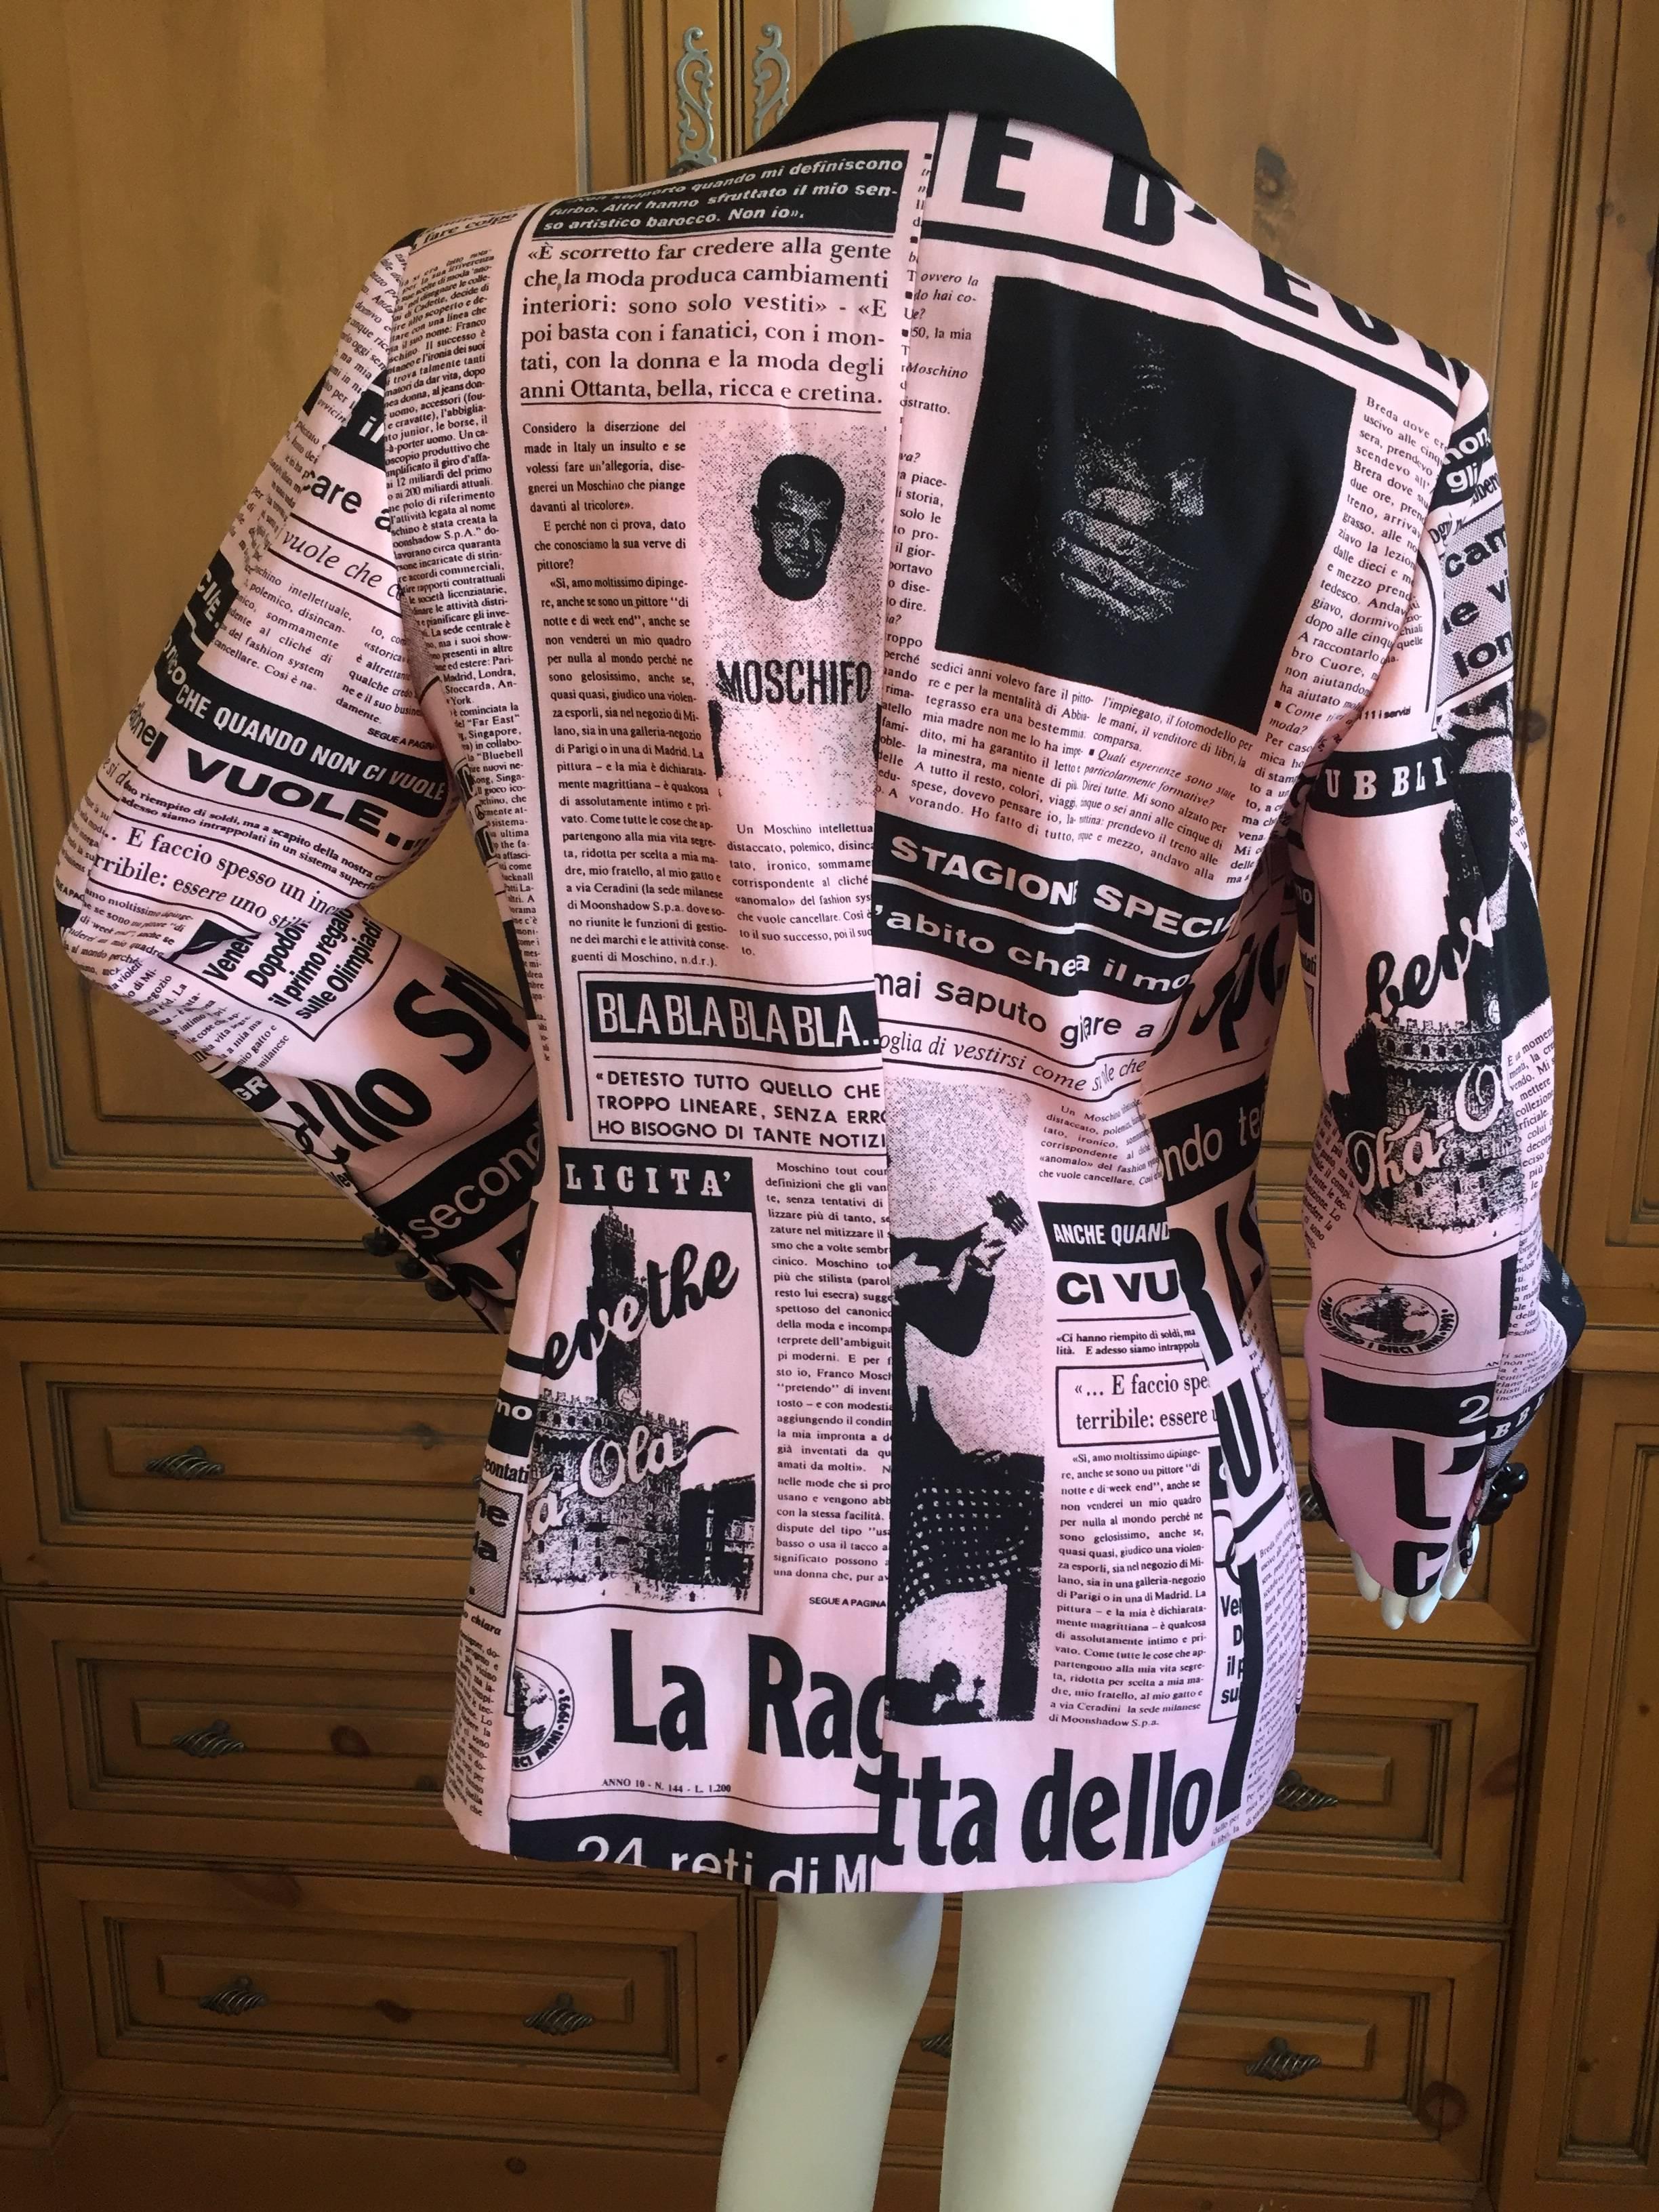 Iconic newsprint jacket from Moschino Couture, circa 1989.
In excellent, possibly unworn condition. 
Size 10 US
Bust 40
Waist 34